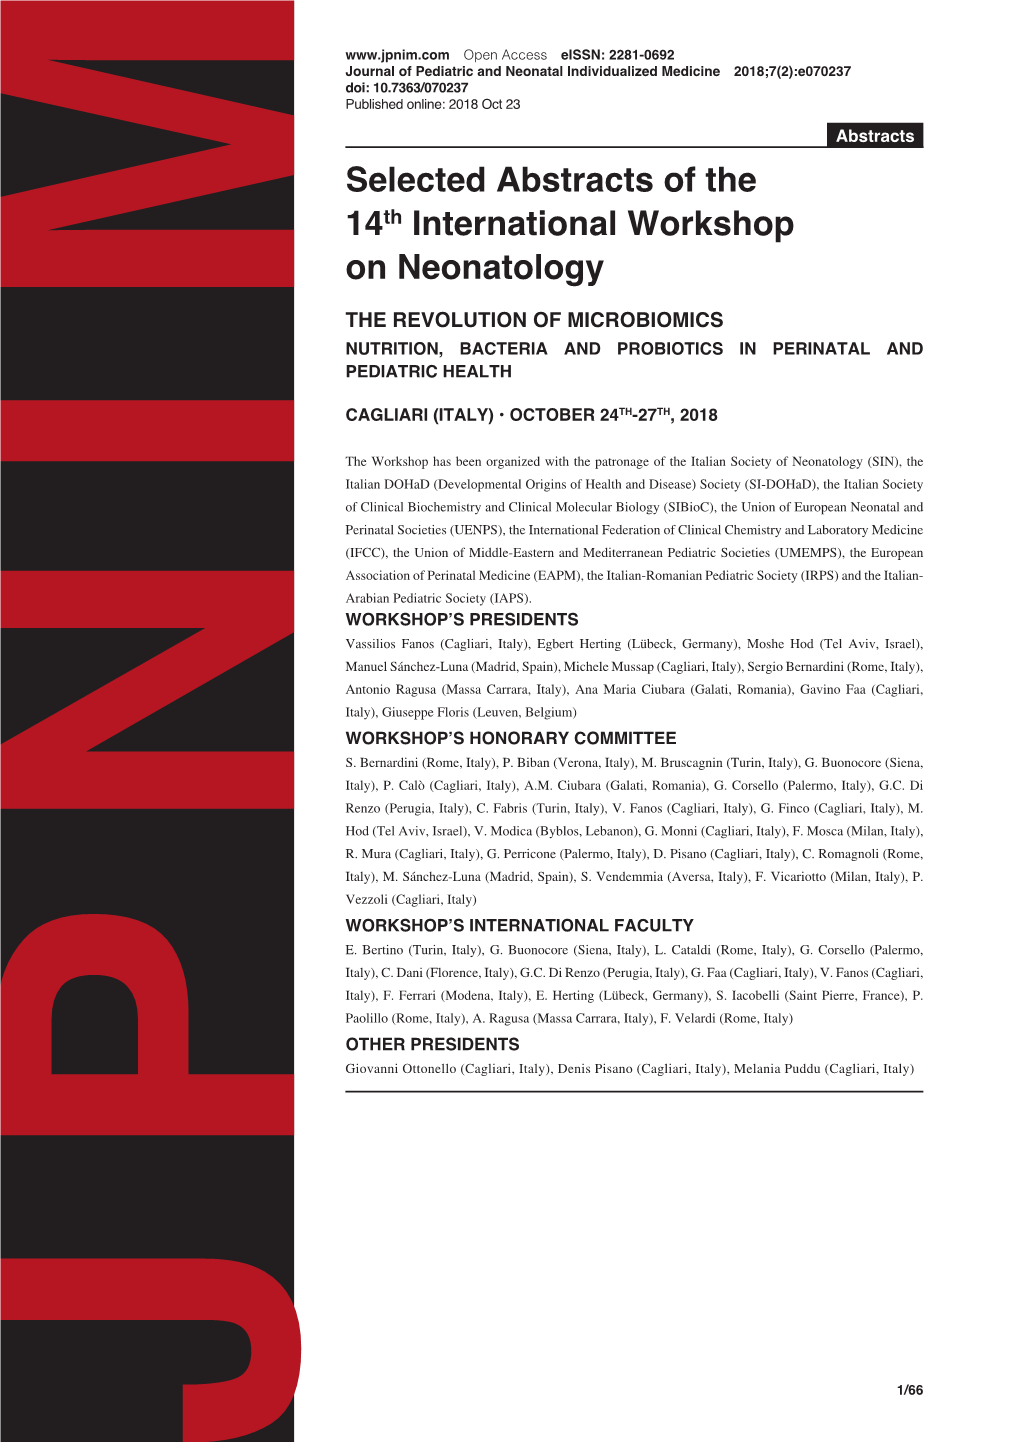 Selected Abstracts of the 14Th International Workshop on Neonatology